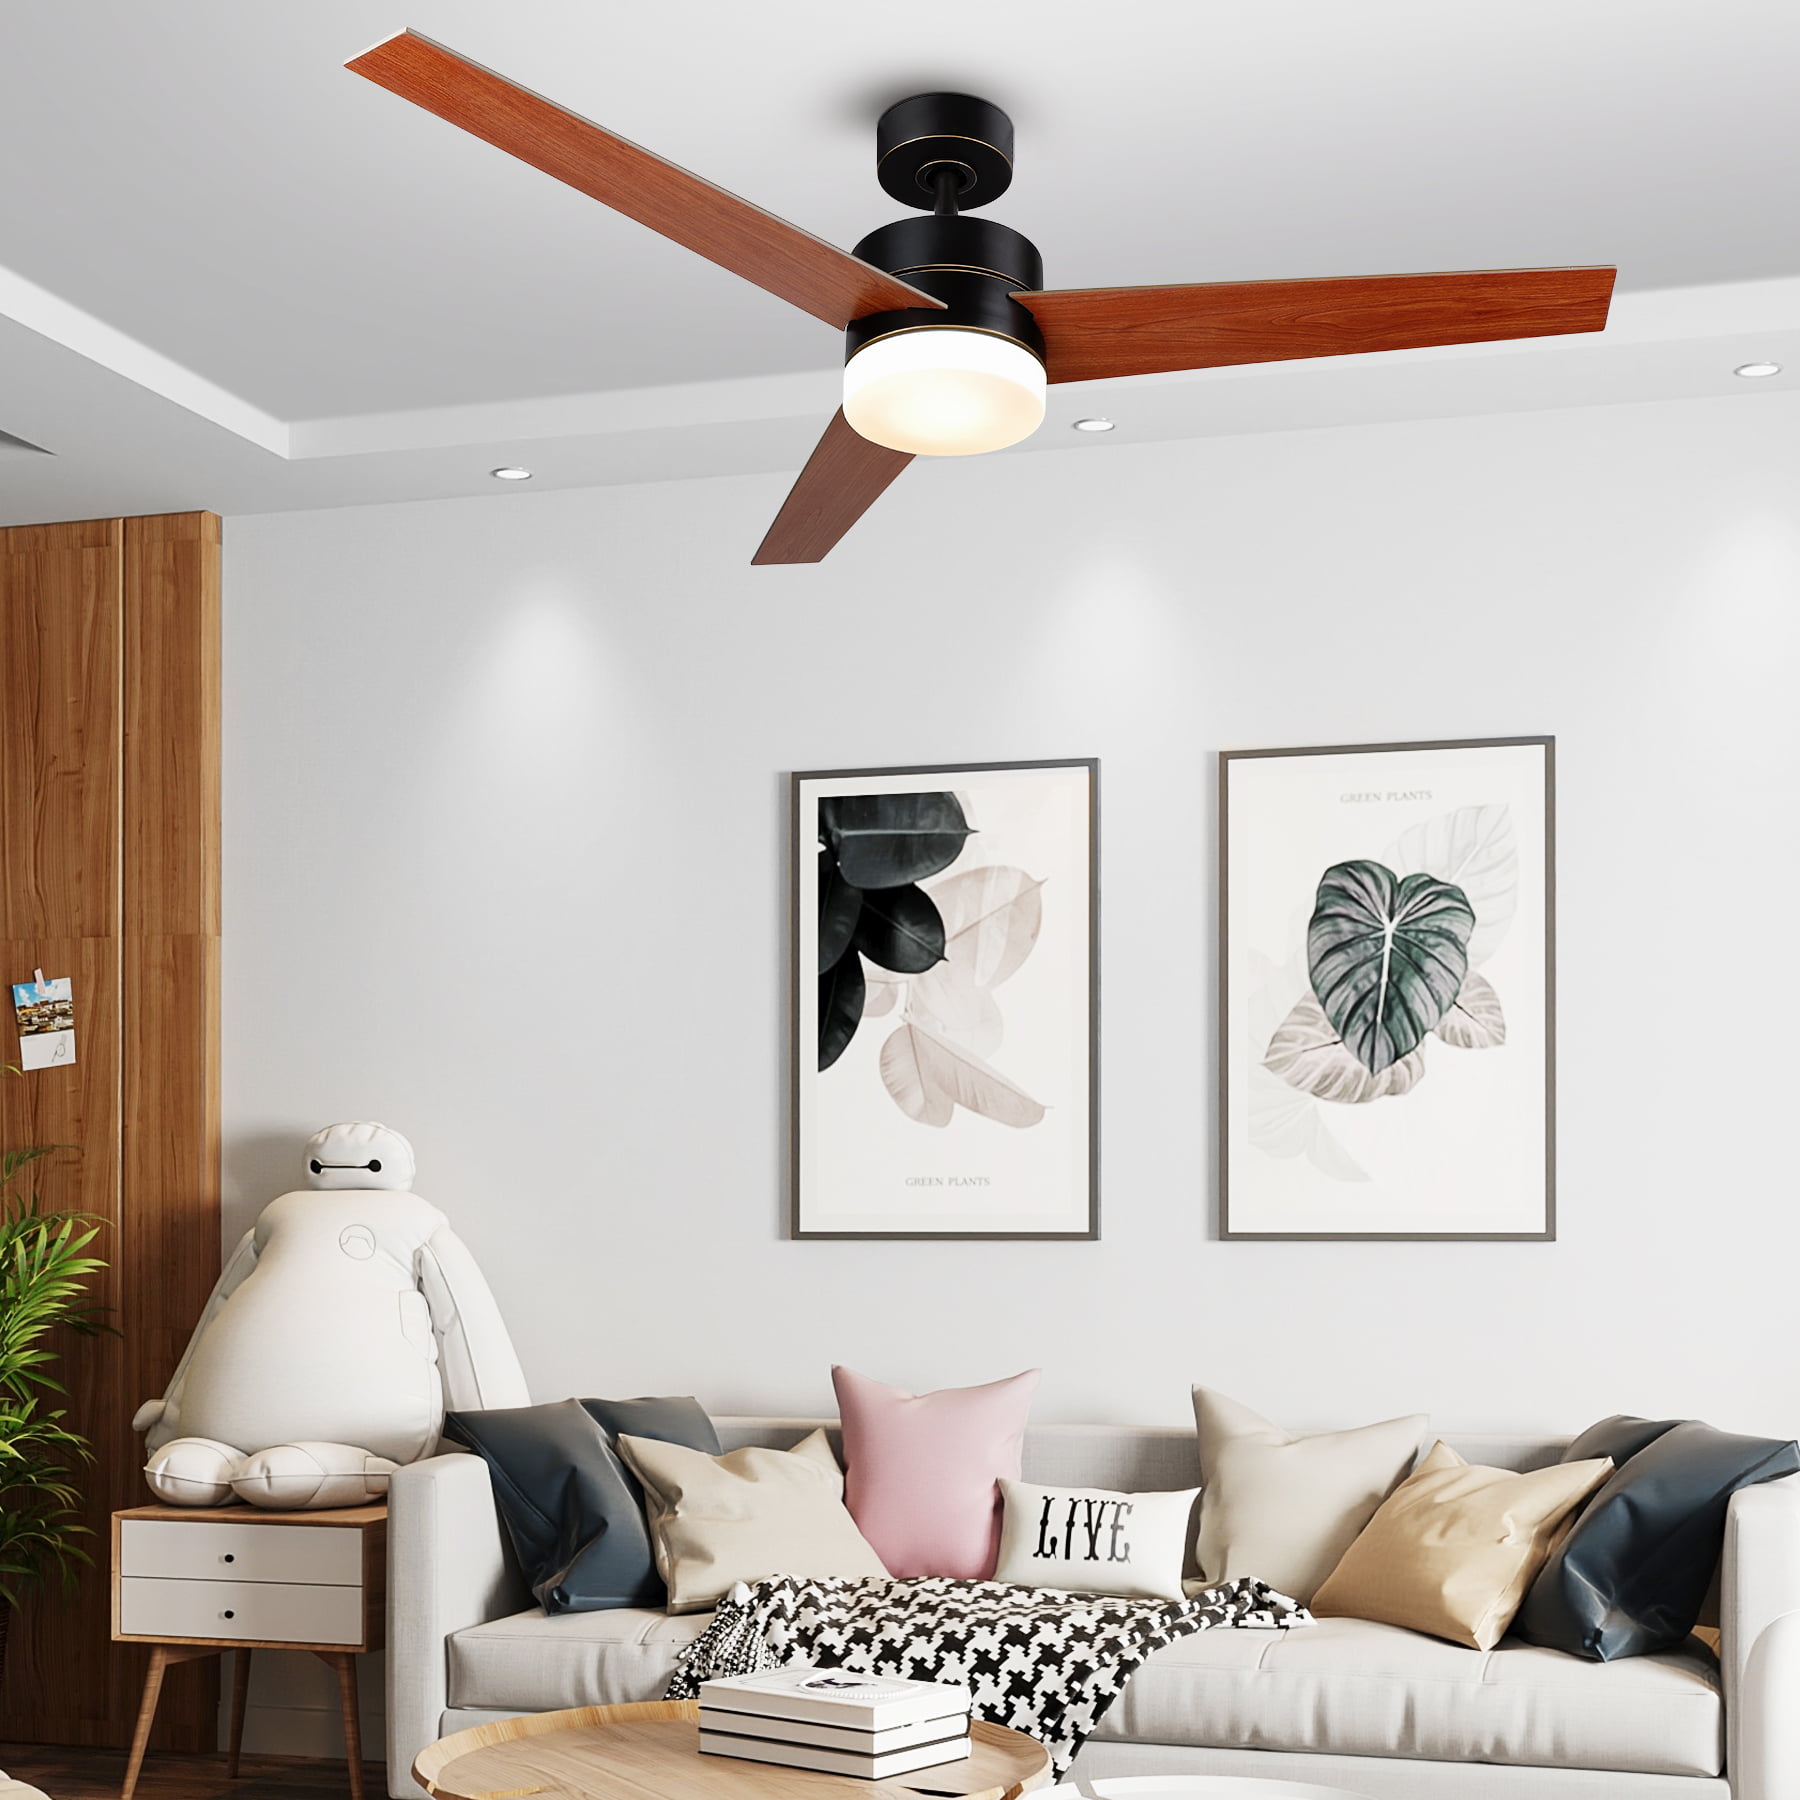 52” Modern Ceiling Fan Light with 15W 3 Color LED Light and 3 Reversible Blades